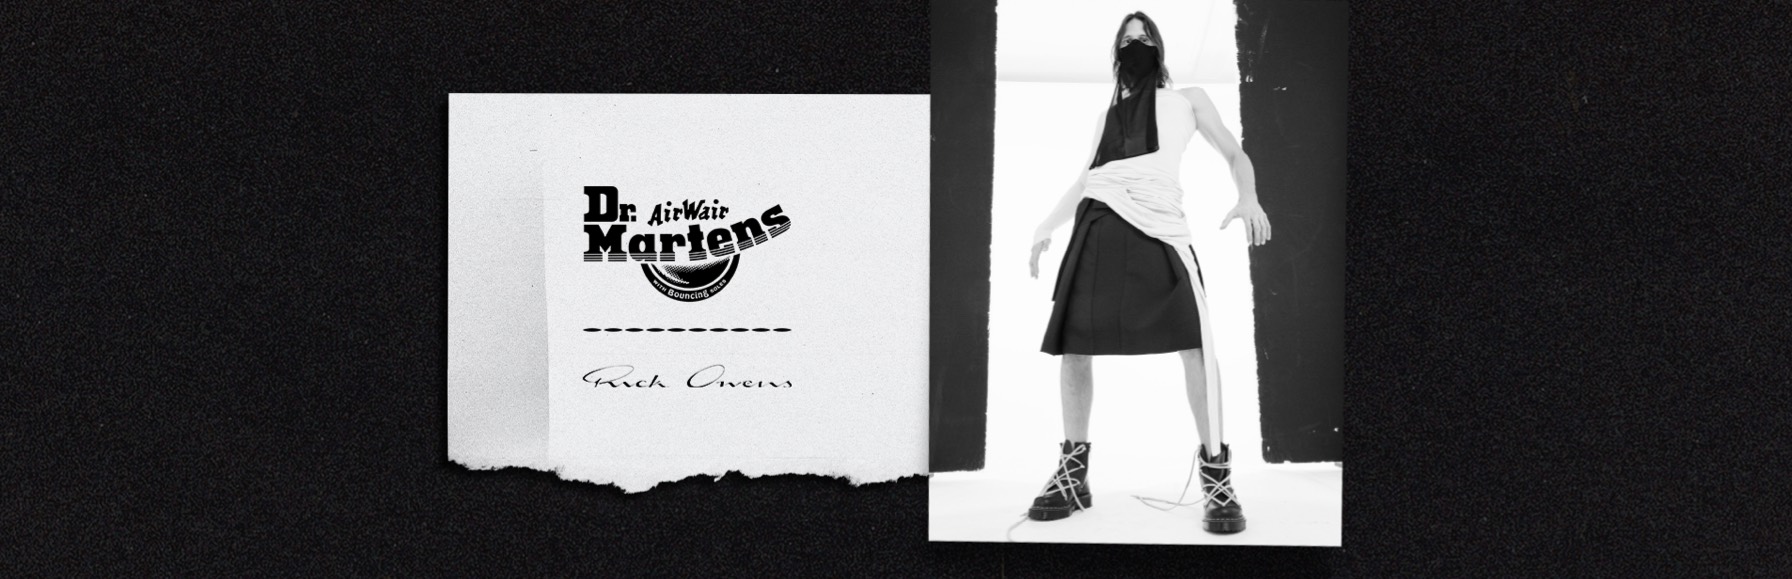 RICK OWENS FOR DR MARTENS IS HERE AND ITS SOLD OUT